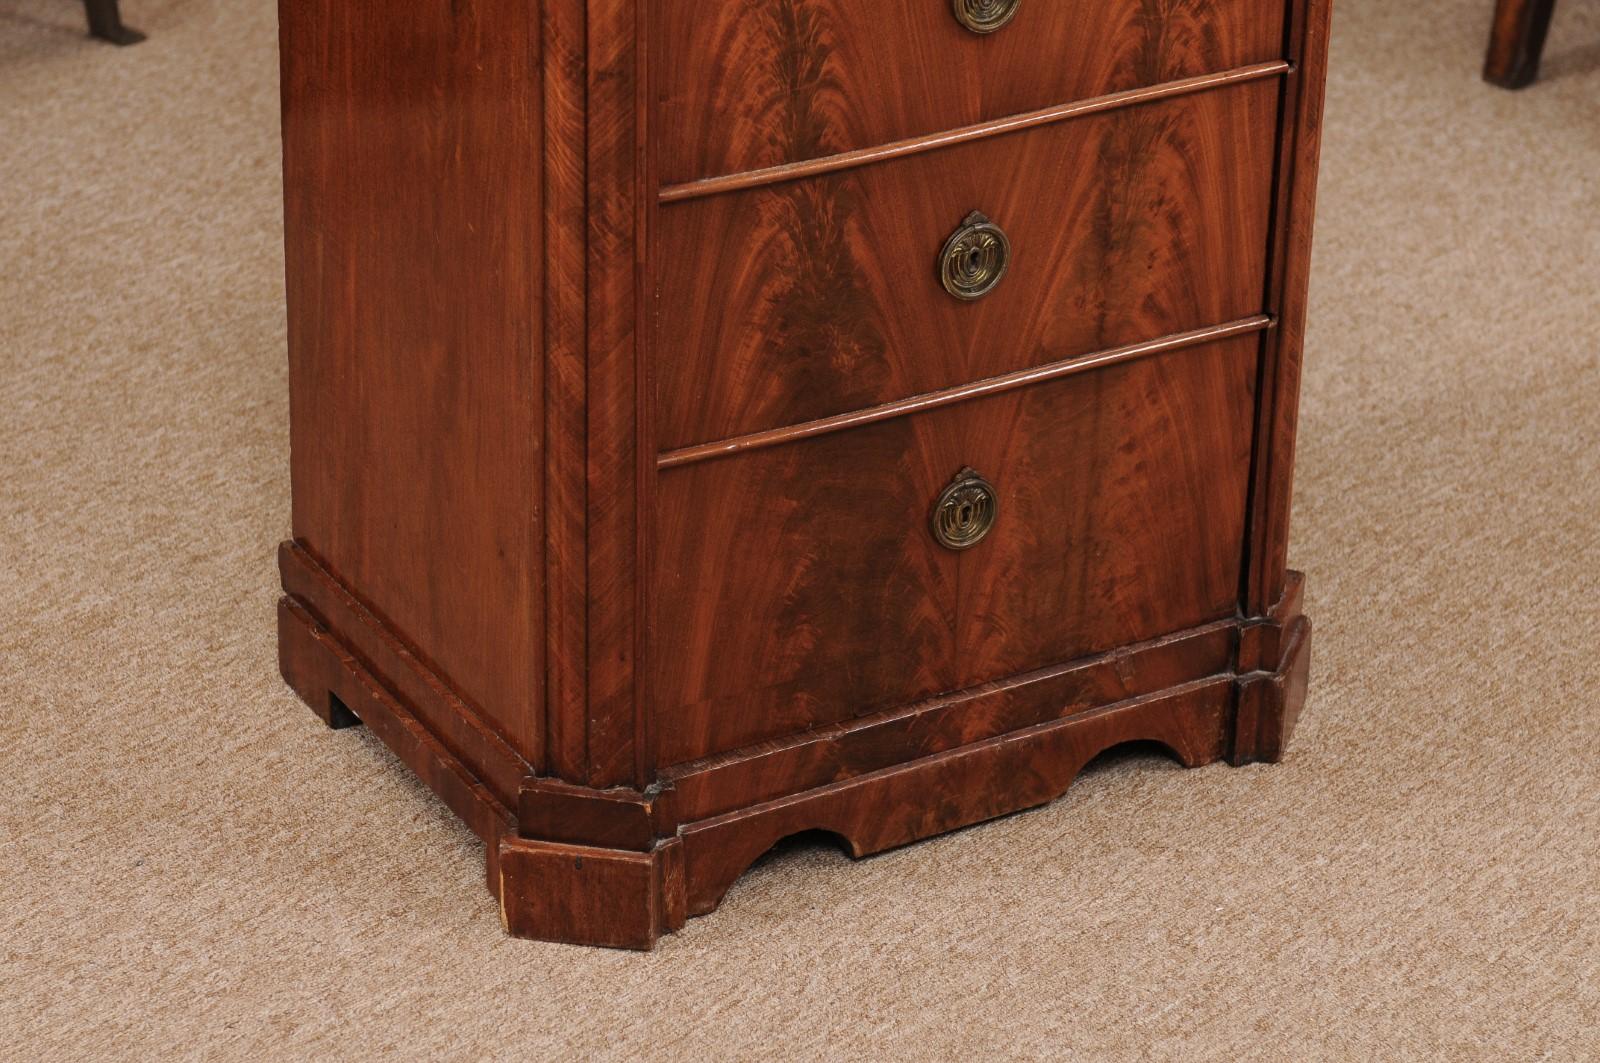 19th Century Biedermeier Walnut Side Cabinet with Canted Corners & Faux Drawers In Good Condition For Sale In Atlanta, GA